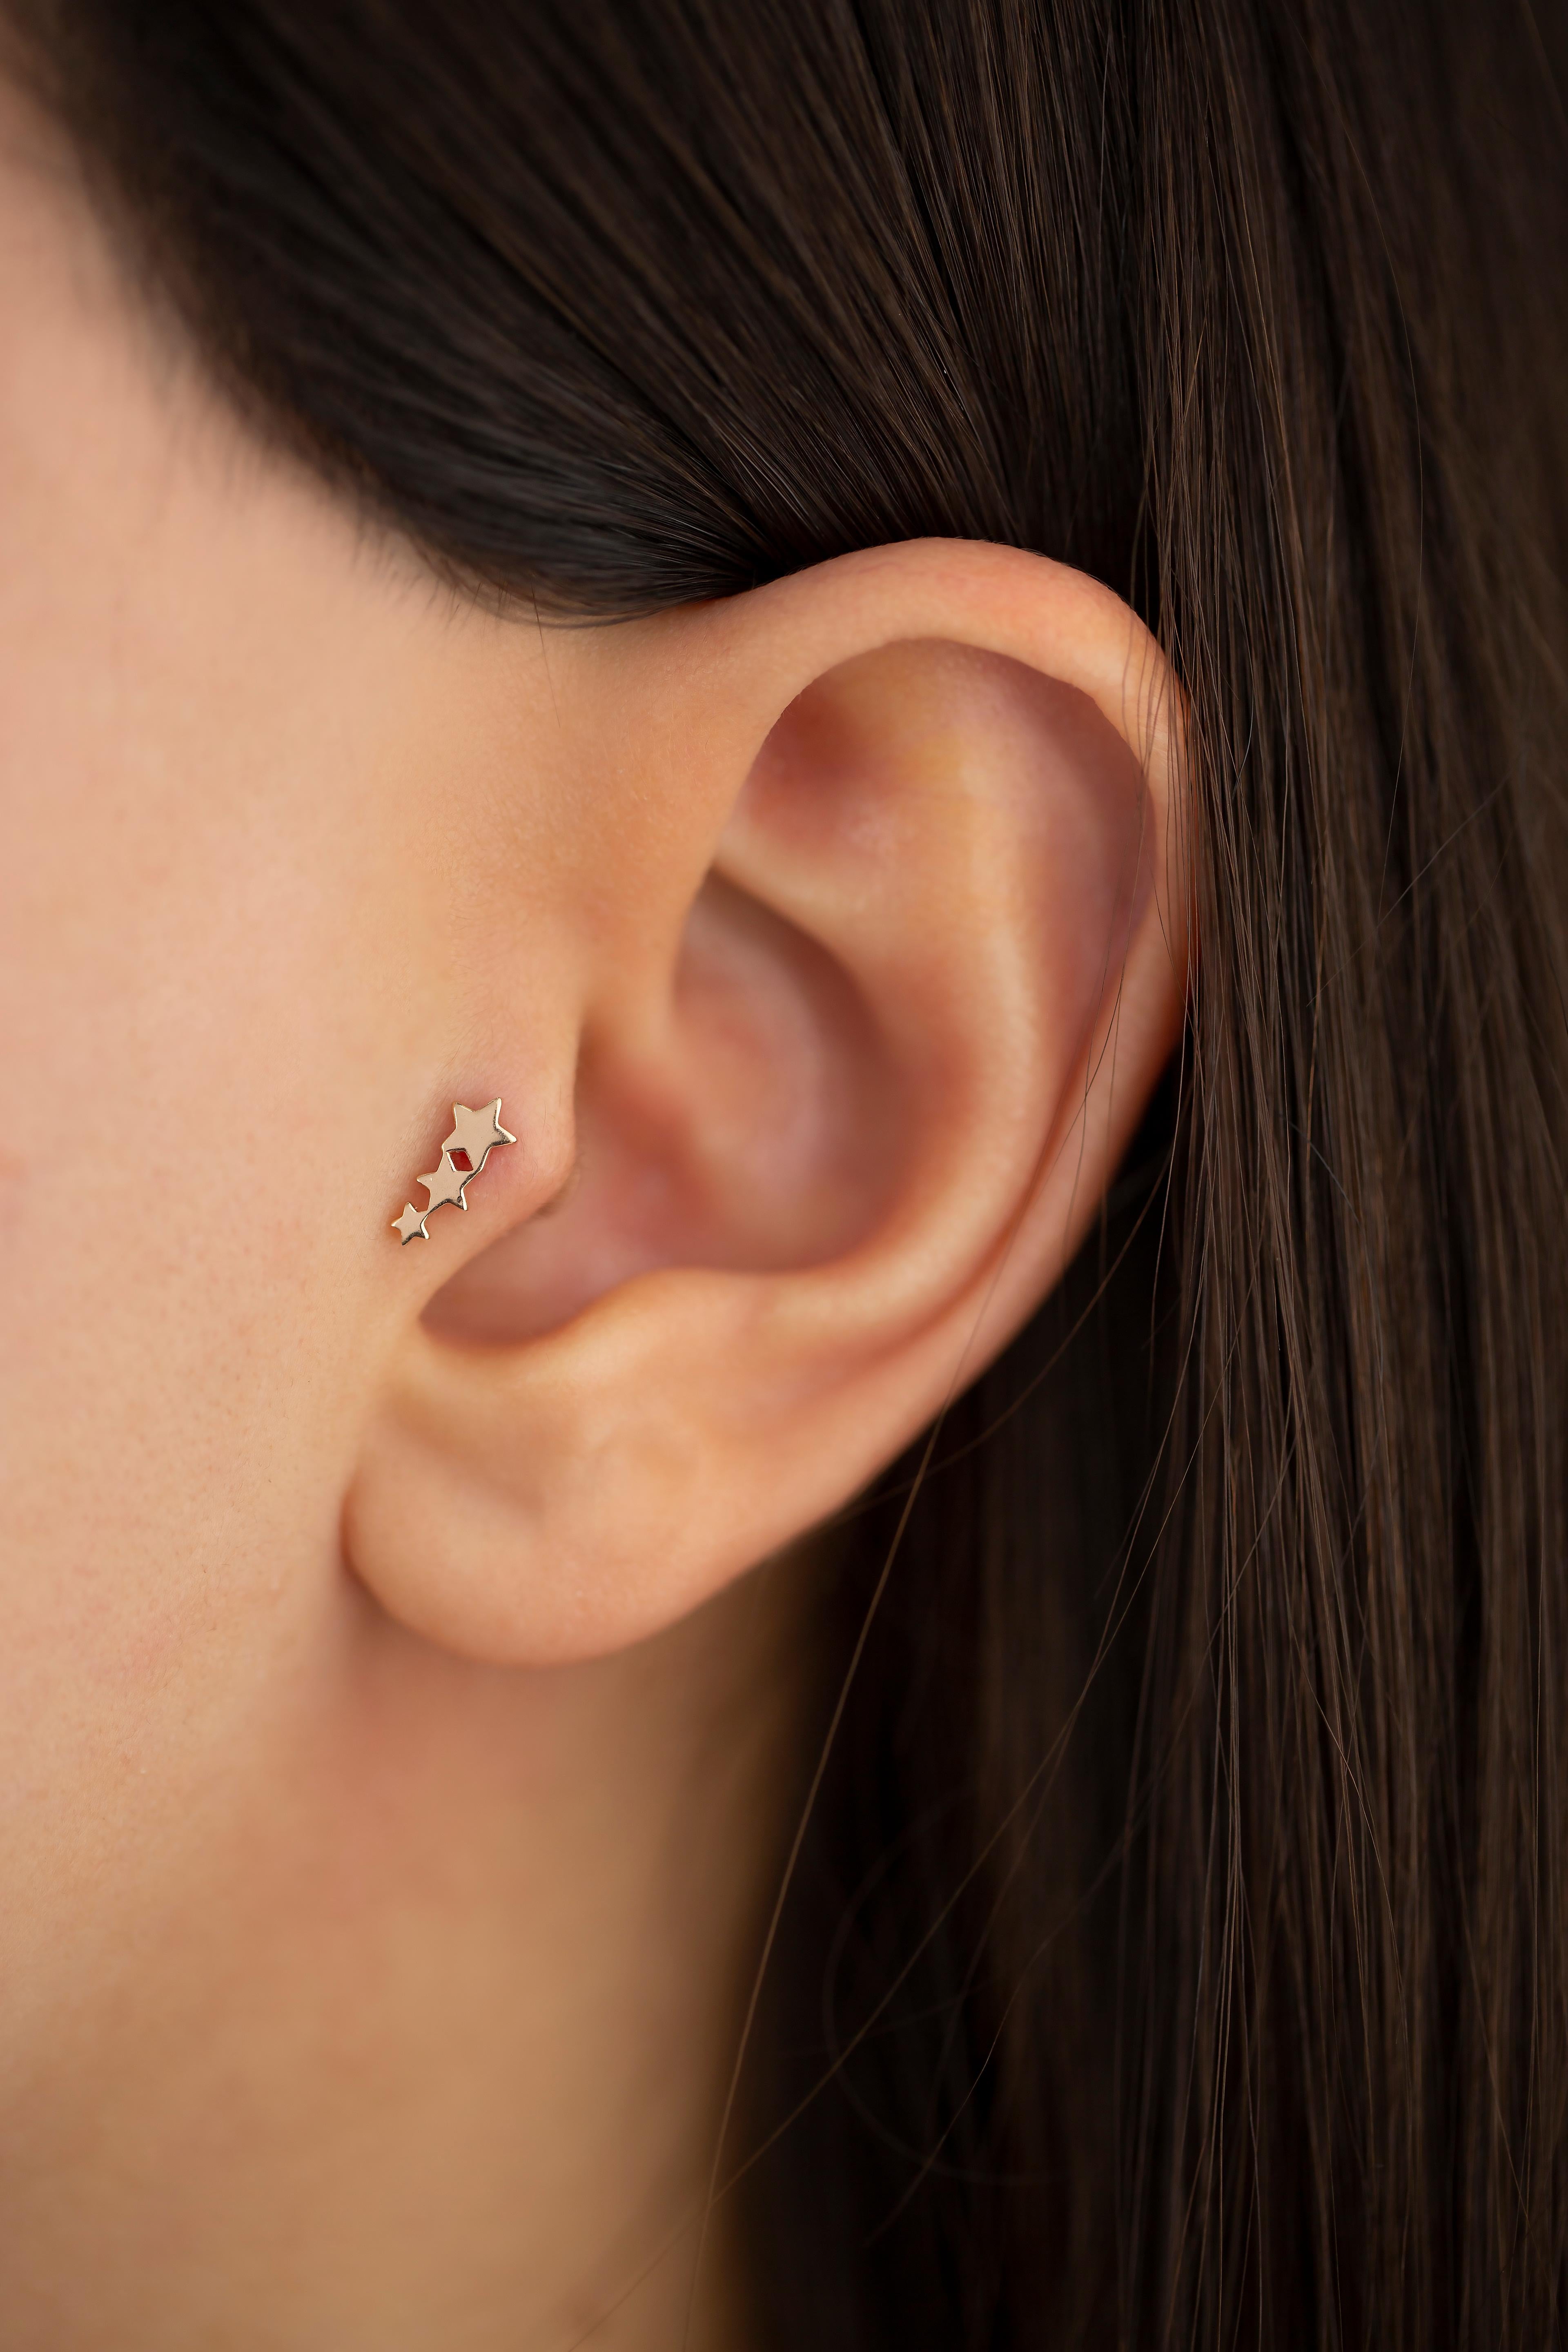 14K Gold Triple Stars Piercing, Gold Three Stars Earring

You can use the piercing as an earring too! Also this piercing is suitable for tragus, nose, helix, lobe, flat, medusa, monreo, labret and stud.

This piercing was made with quality materials